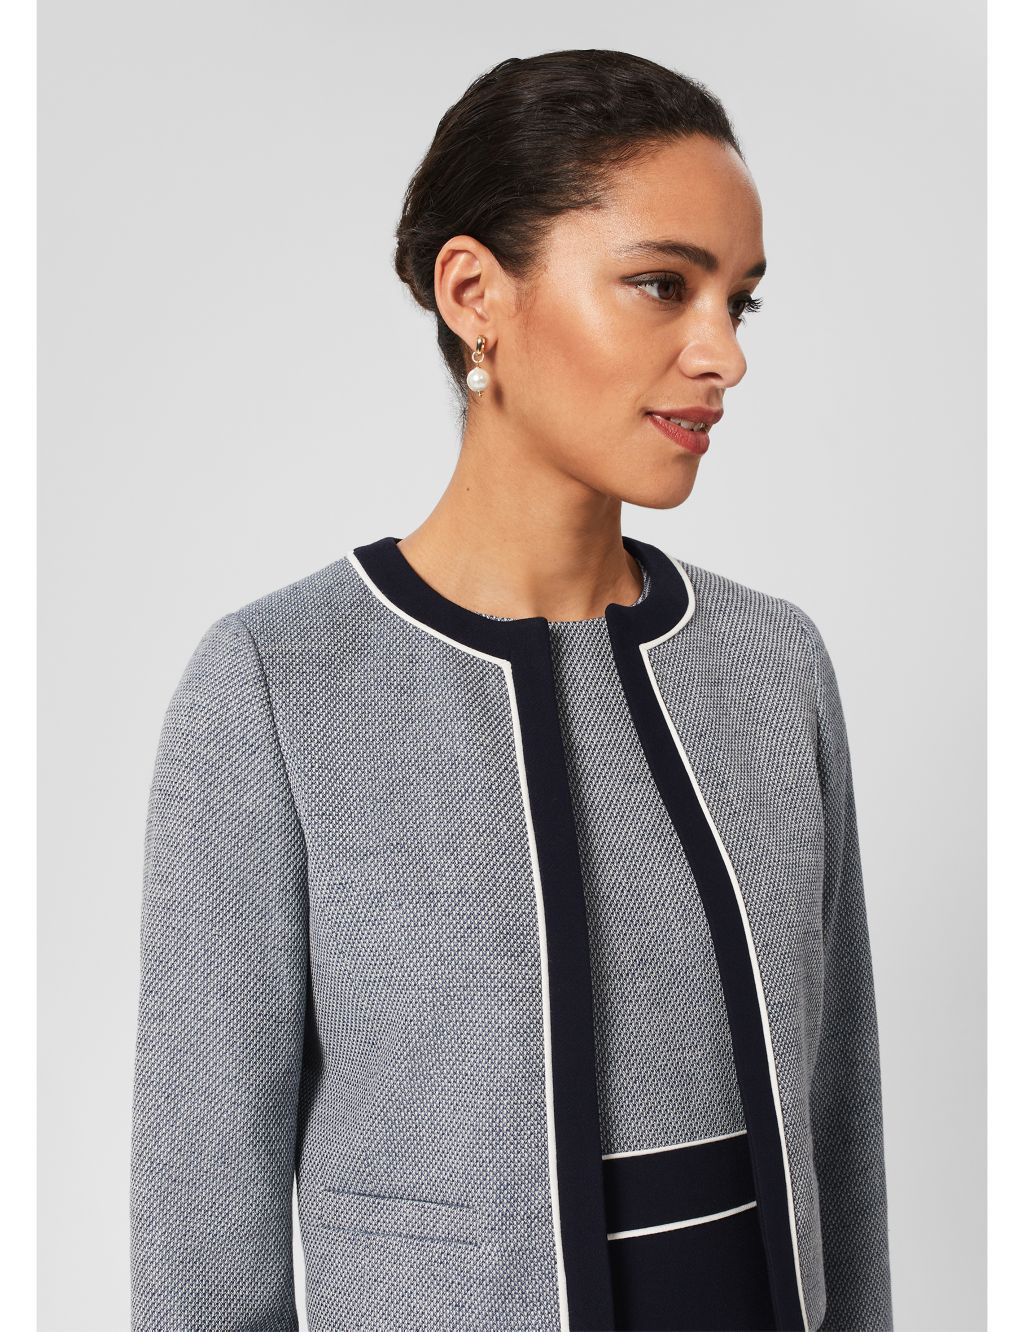 Textured Cropped Blazer with Linen image 2